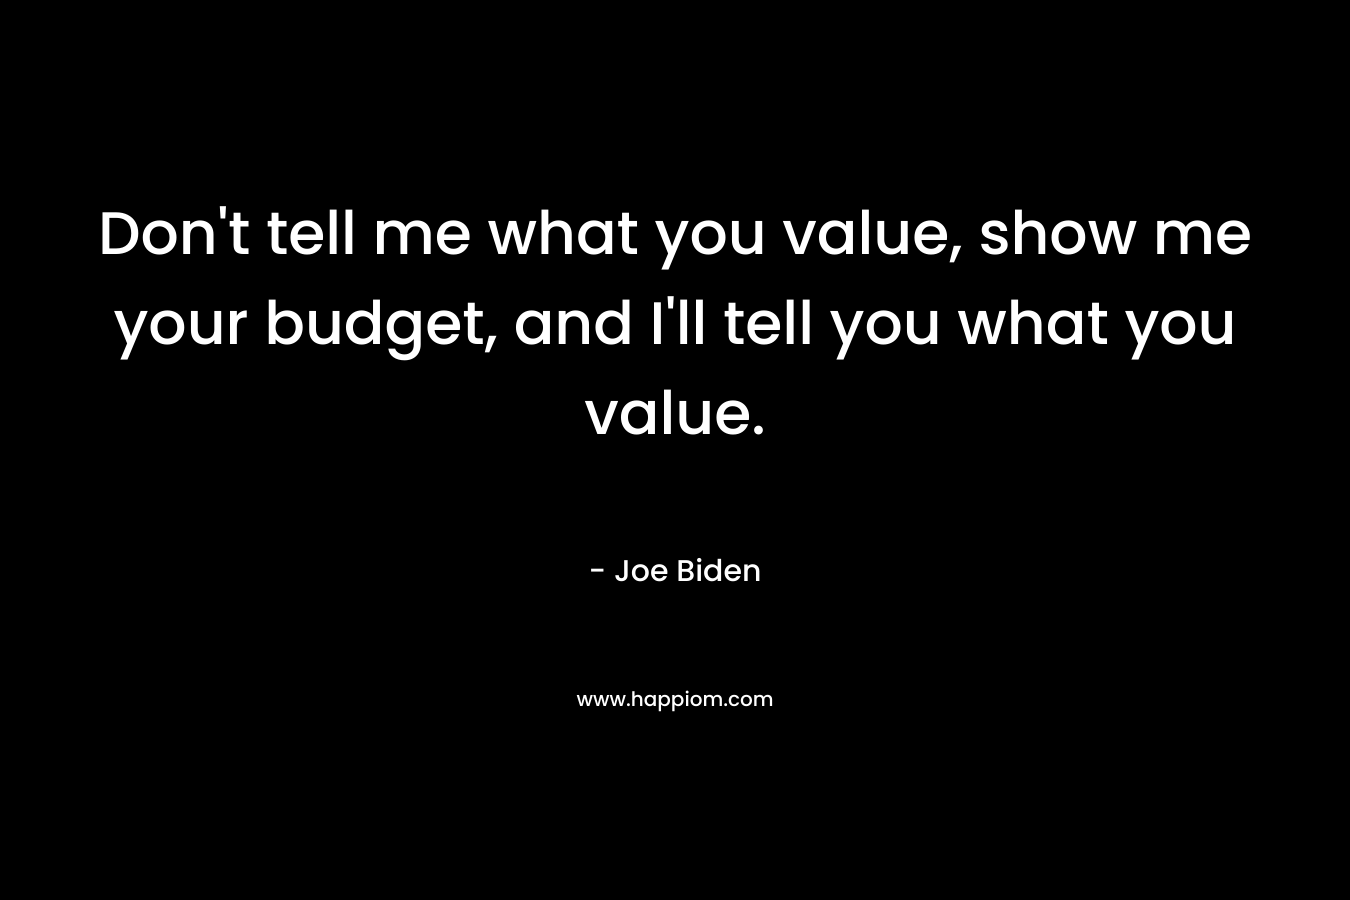 Don’t tell me what you value, show me your budget, and I’ll tell you what you value. – Joe Biden